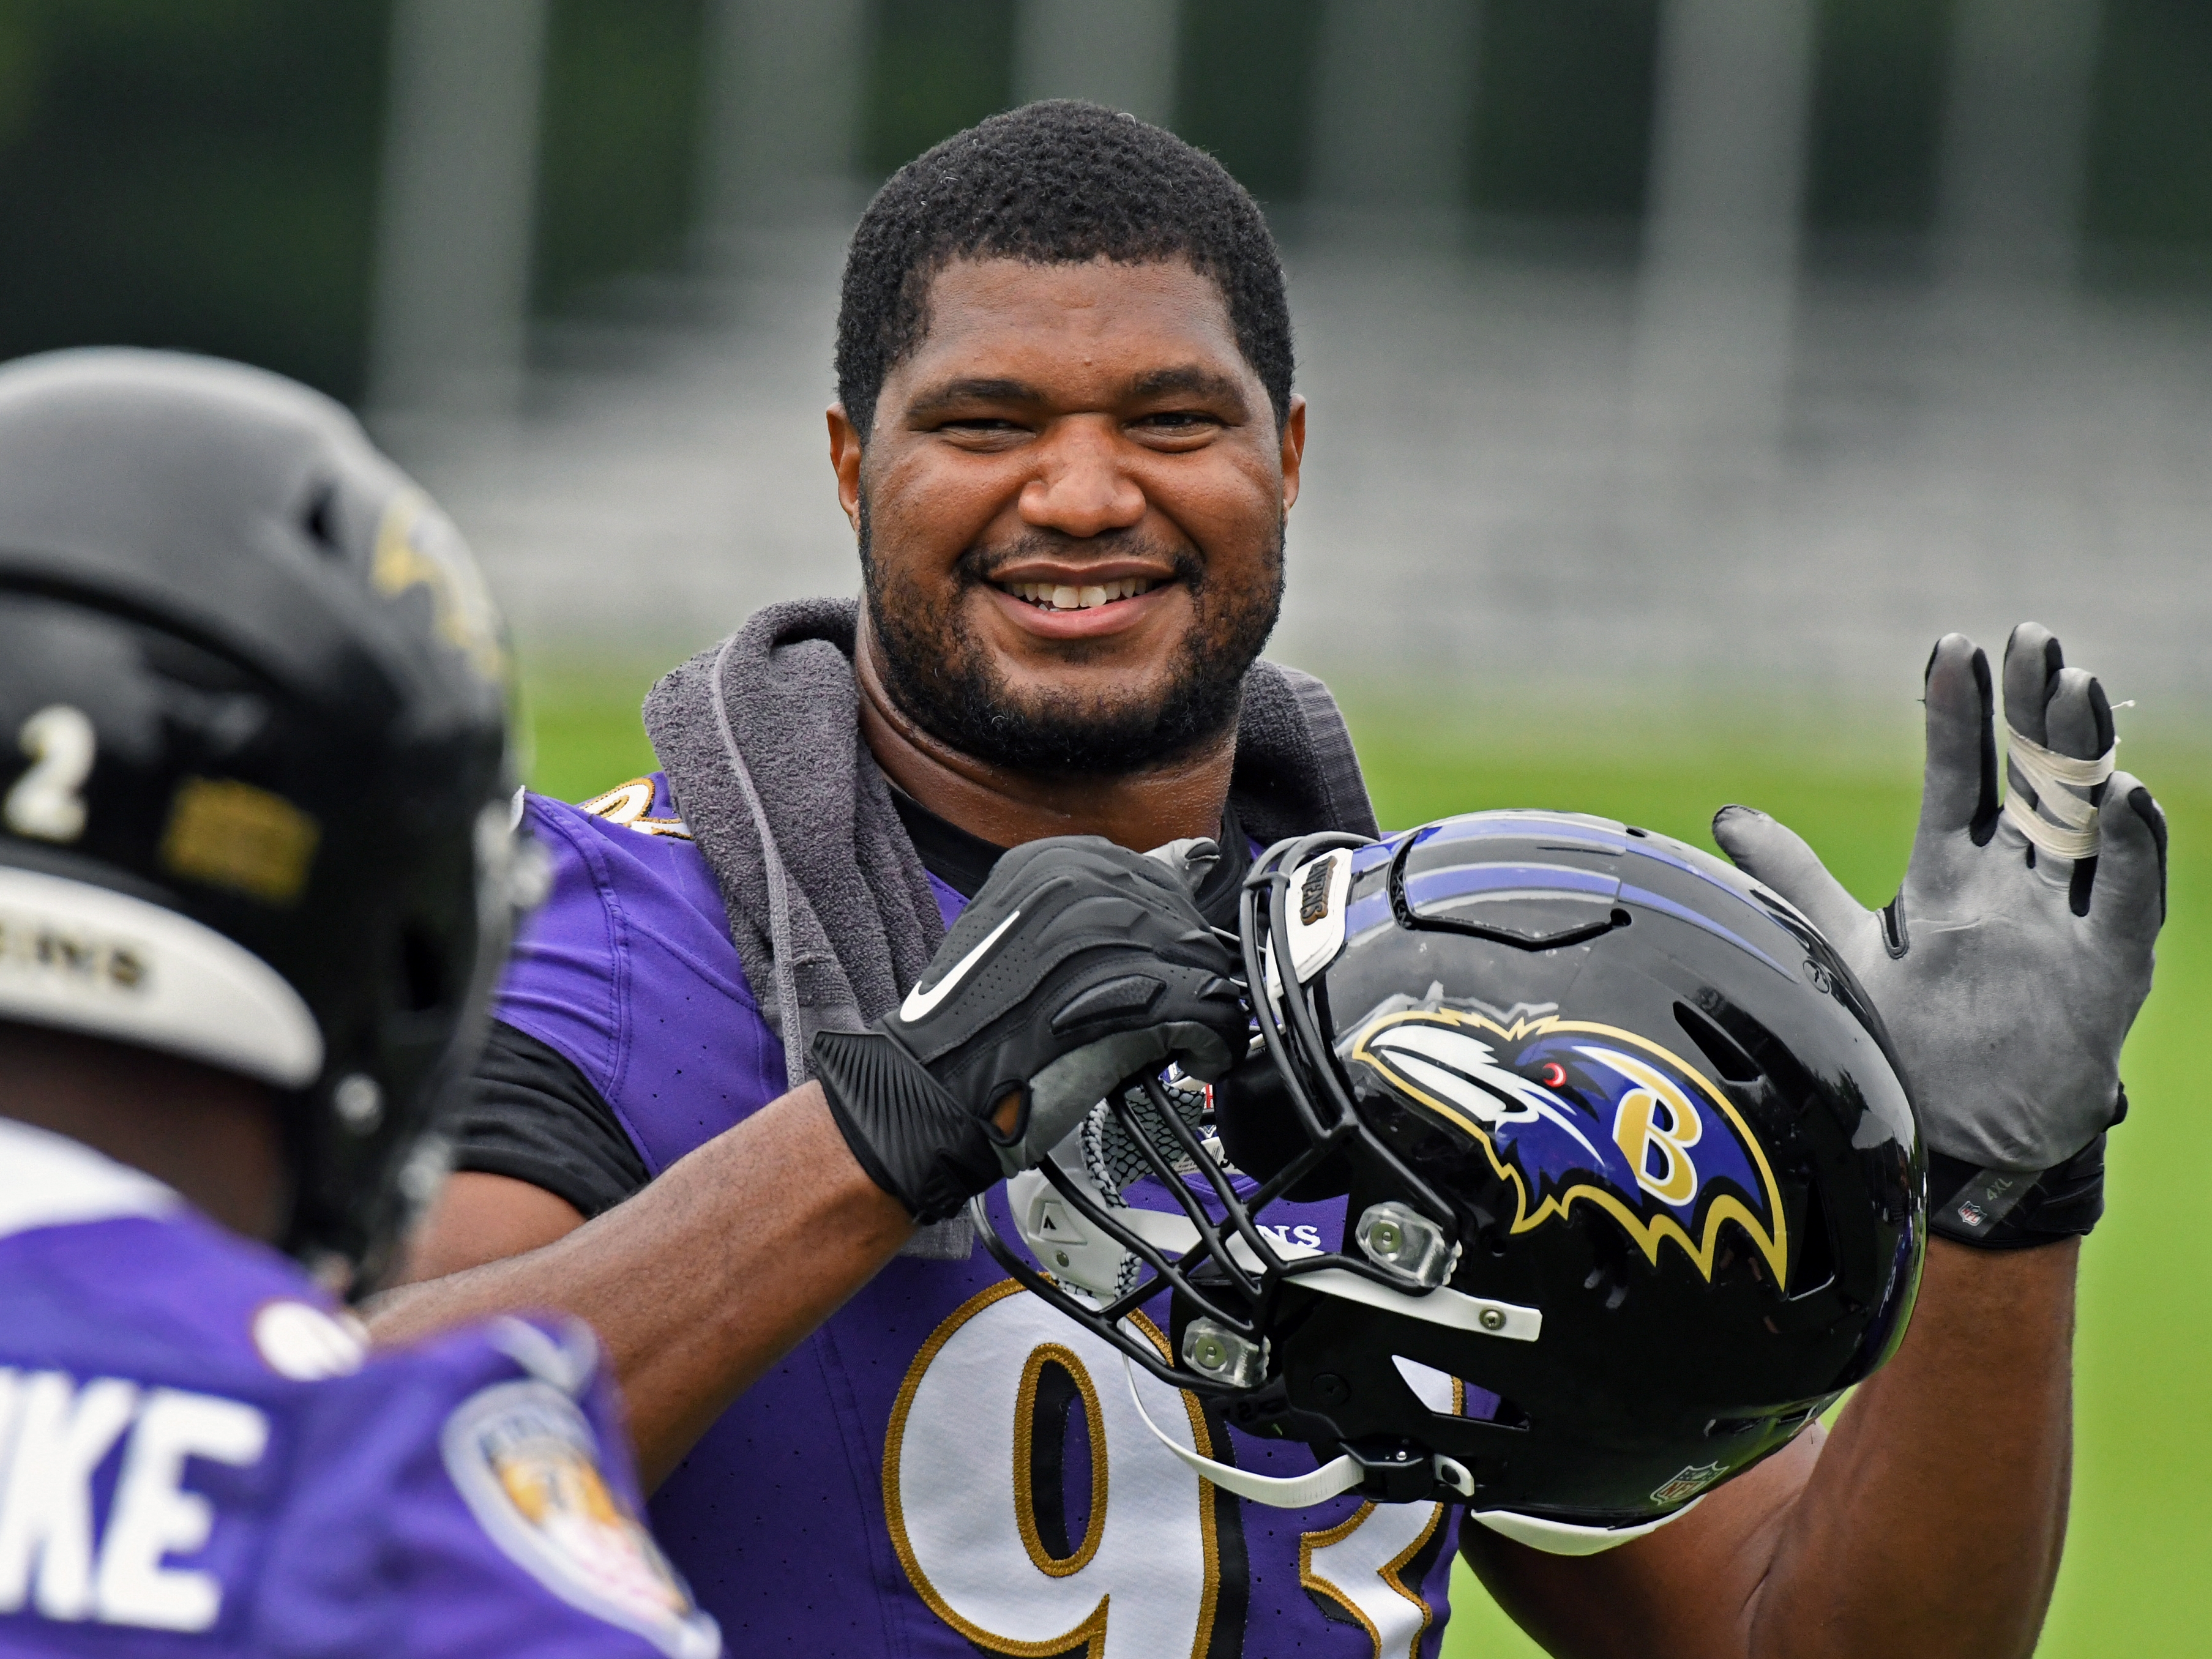 Mike Preston: On and off the field, Ravens DE Calais Campbell is